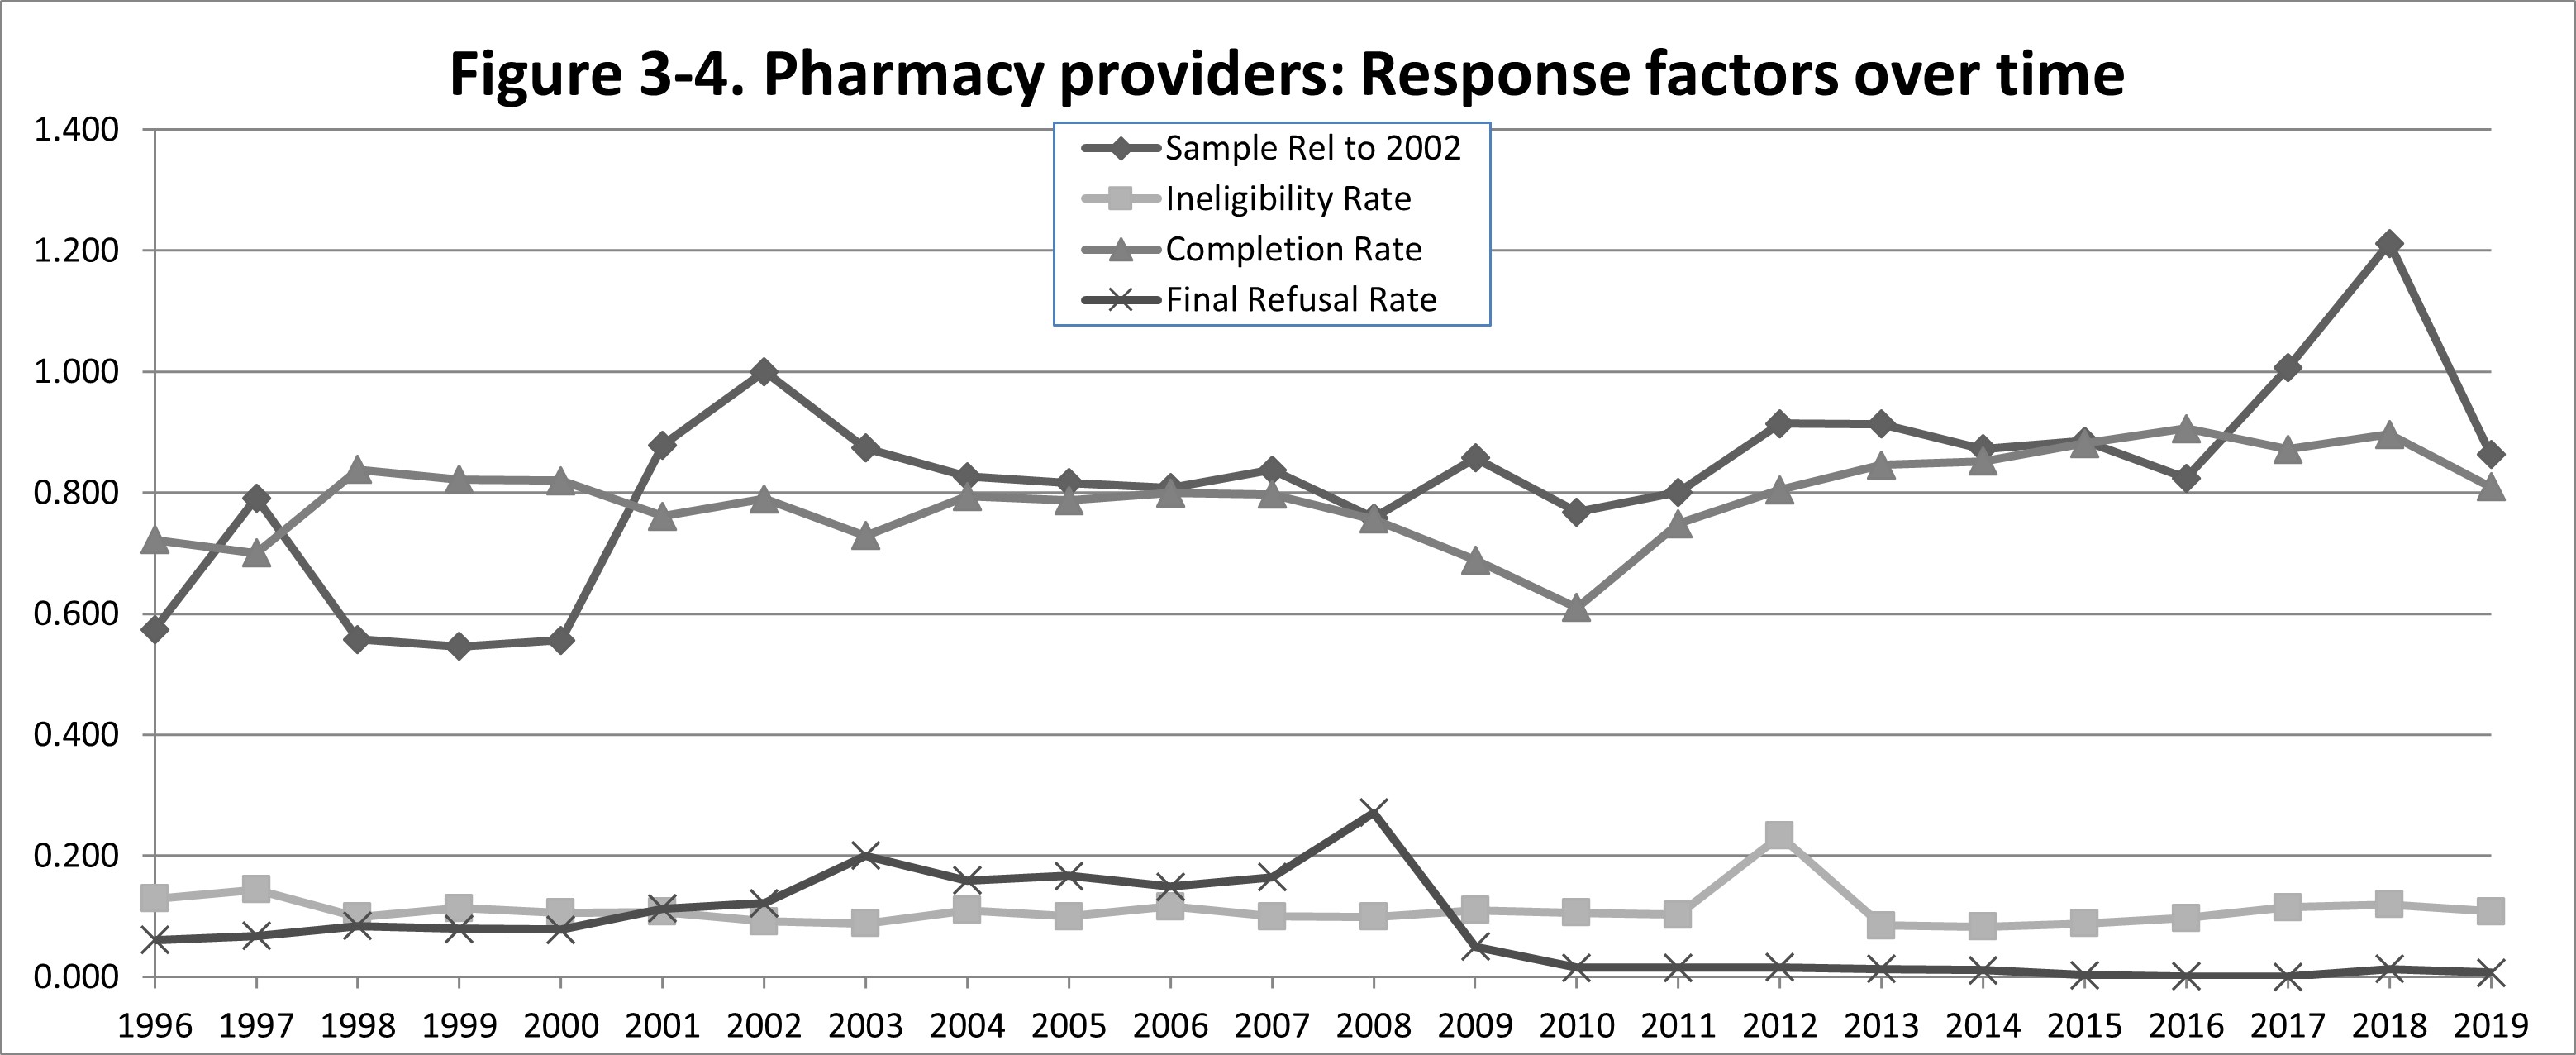 Image displaying response factors over time, from 1996 through 2019 for pharmacy providers